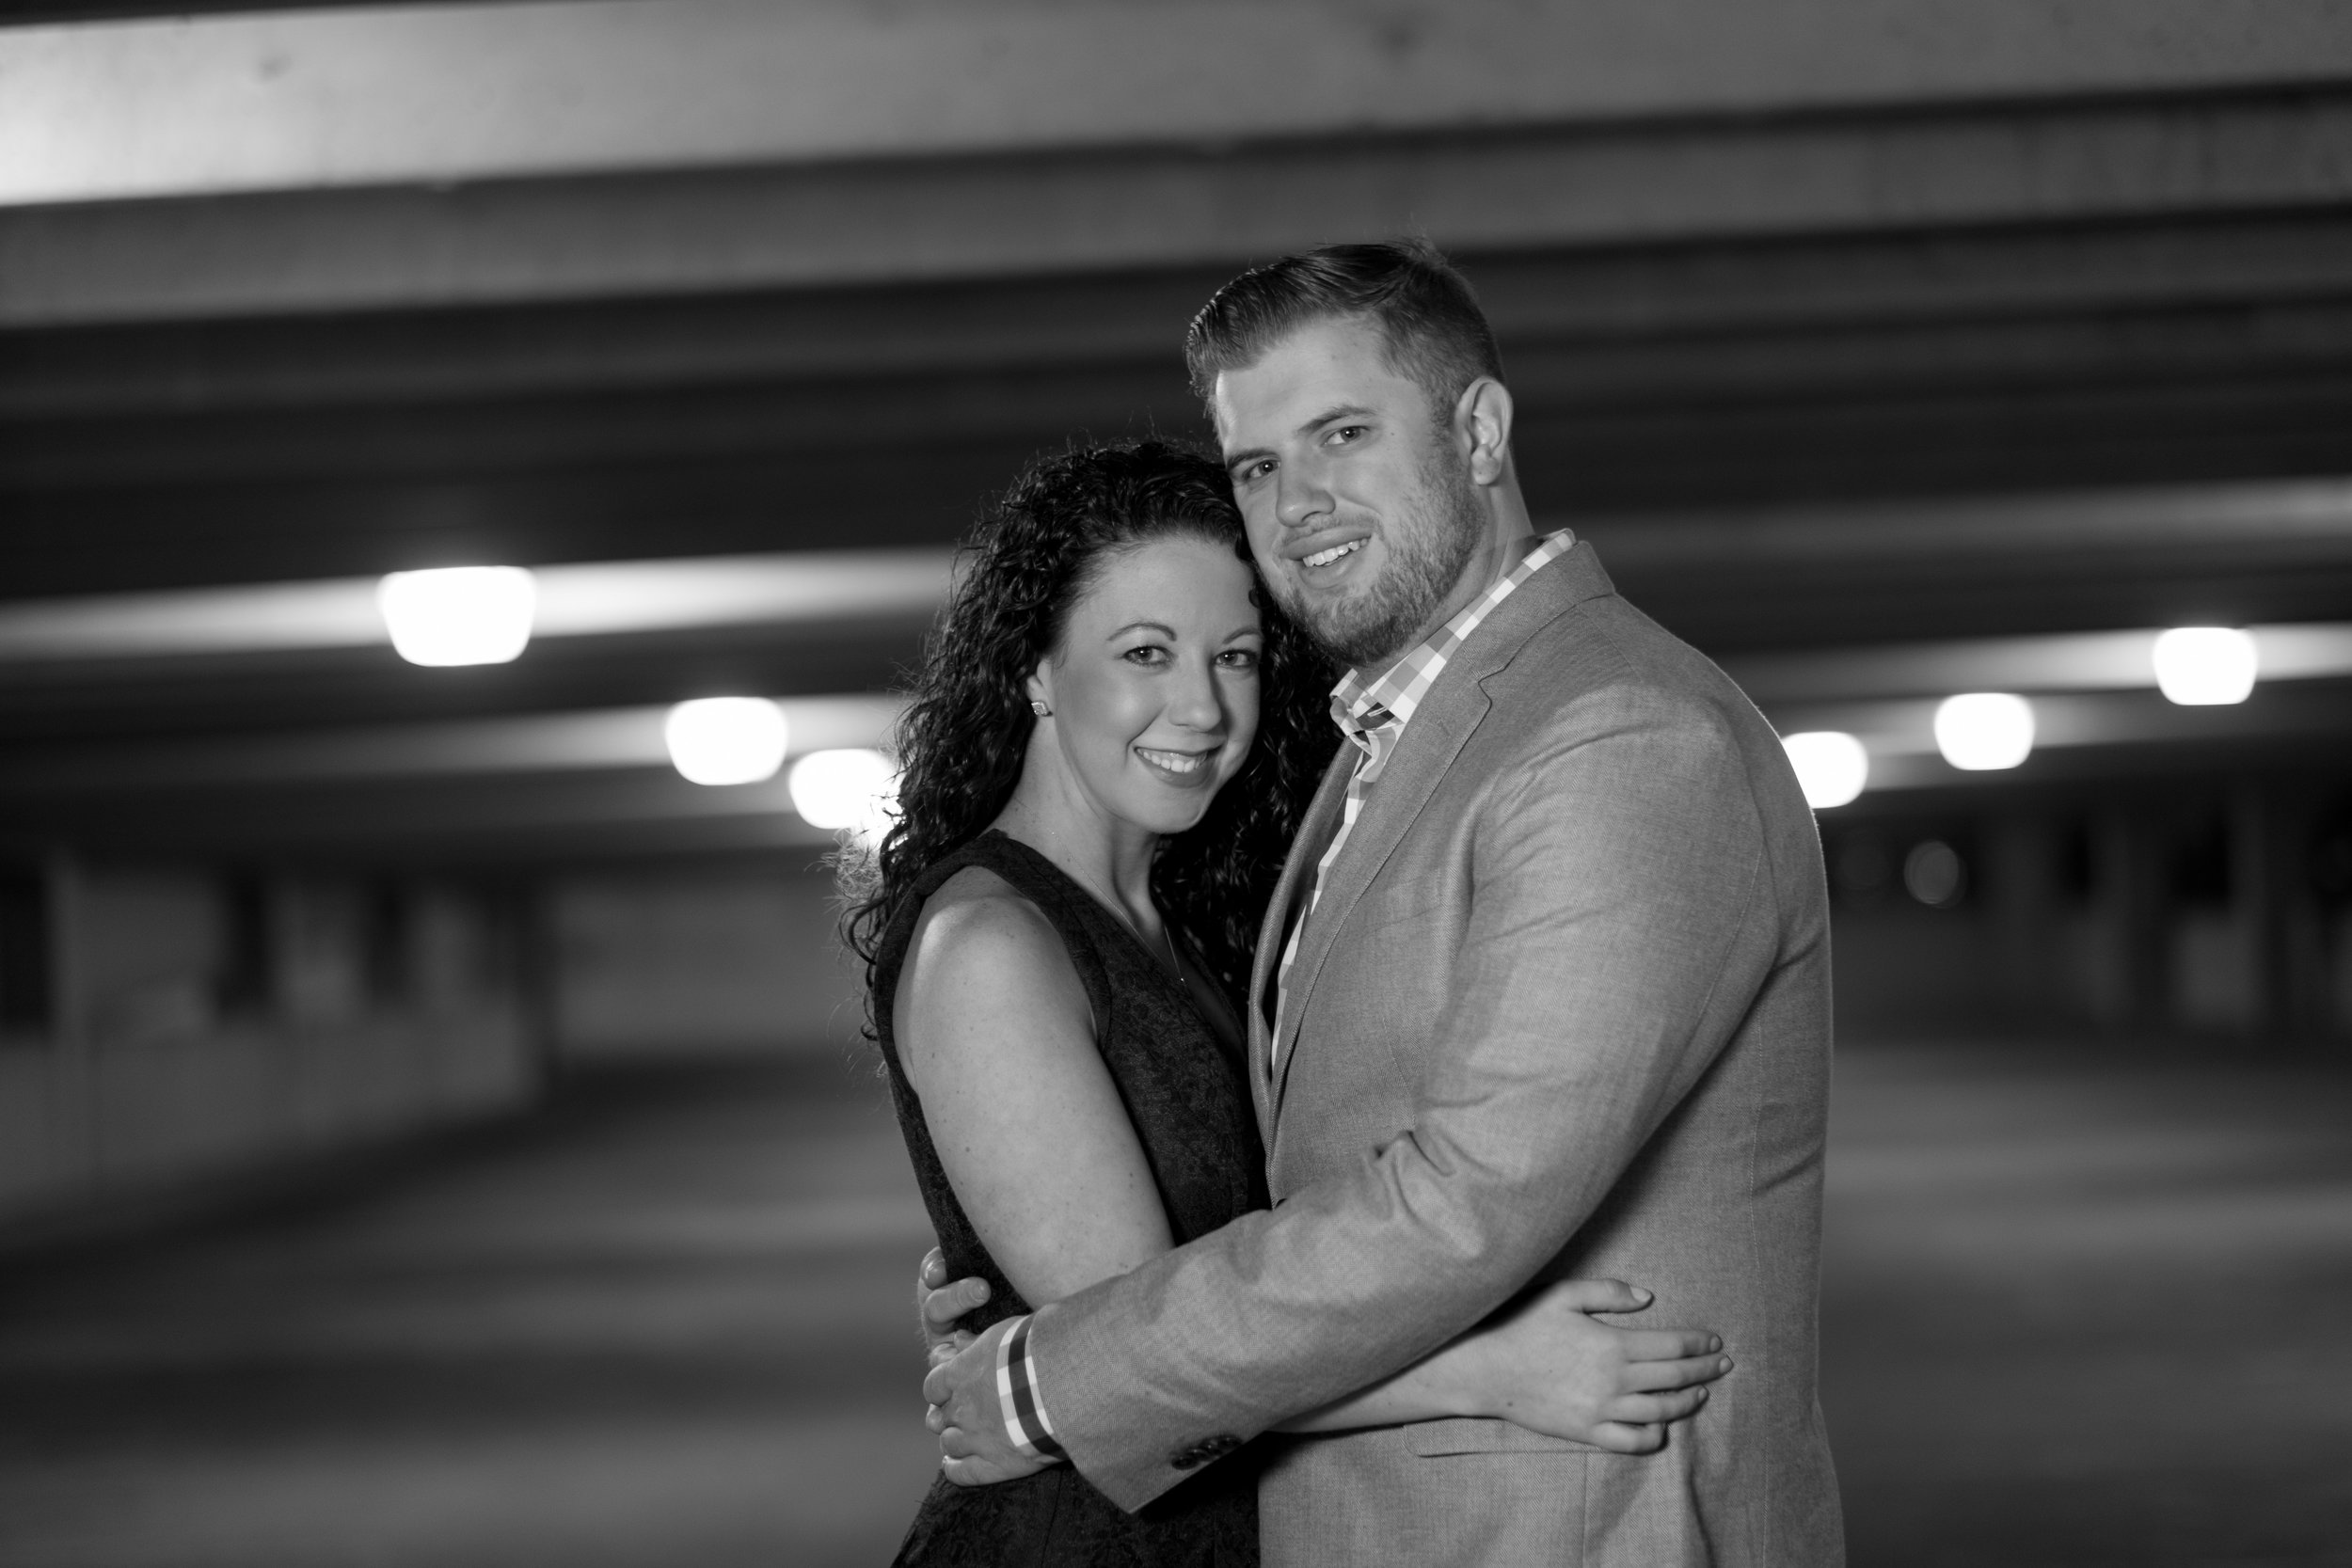 Downtown-Indianapolis-night-engagement-pictures-08.jpg